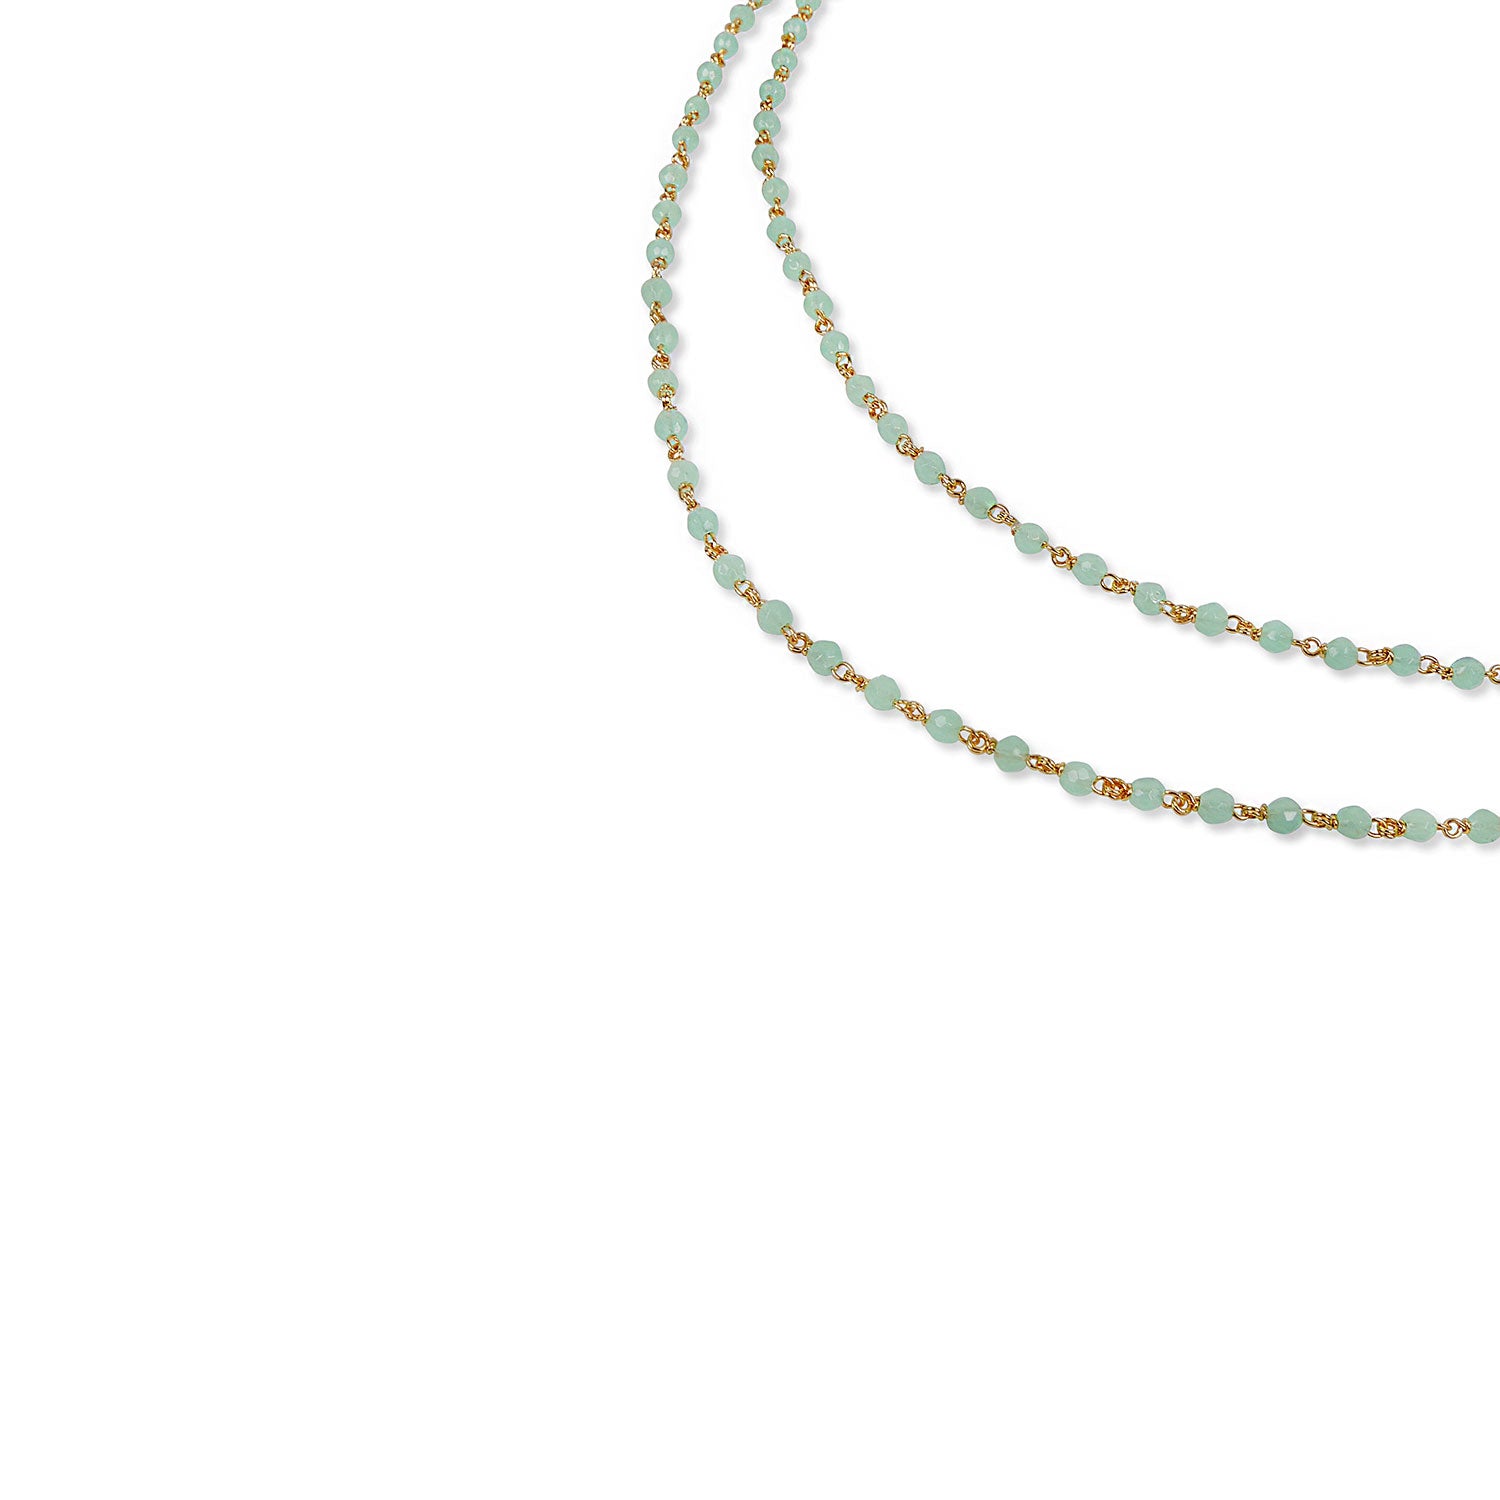 Maria Layered Bead Necklace in Mint